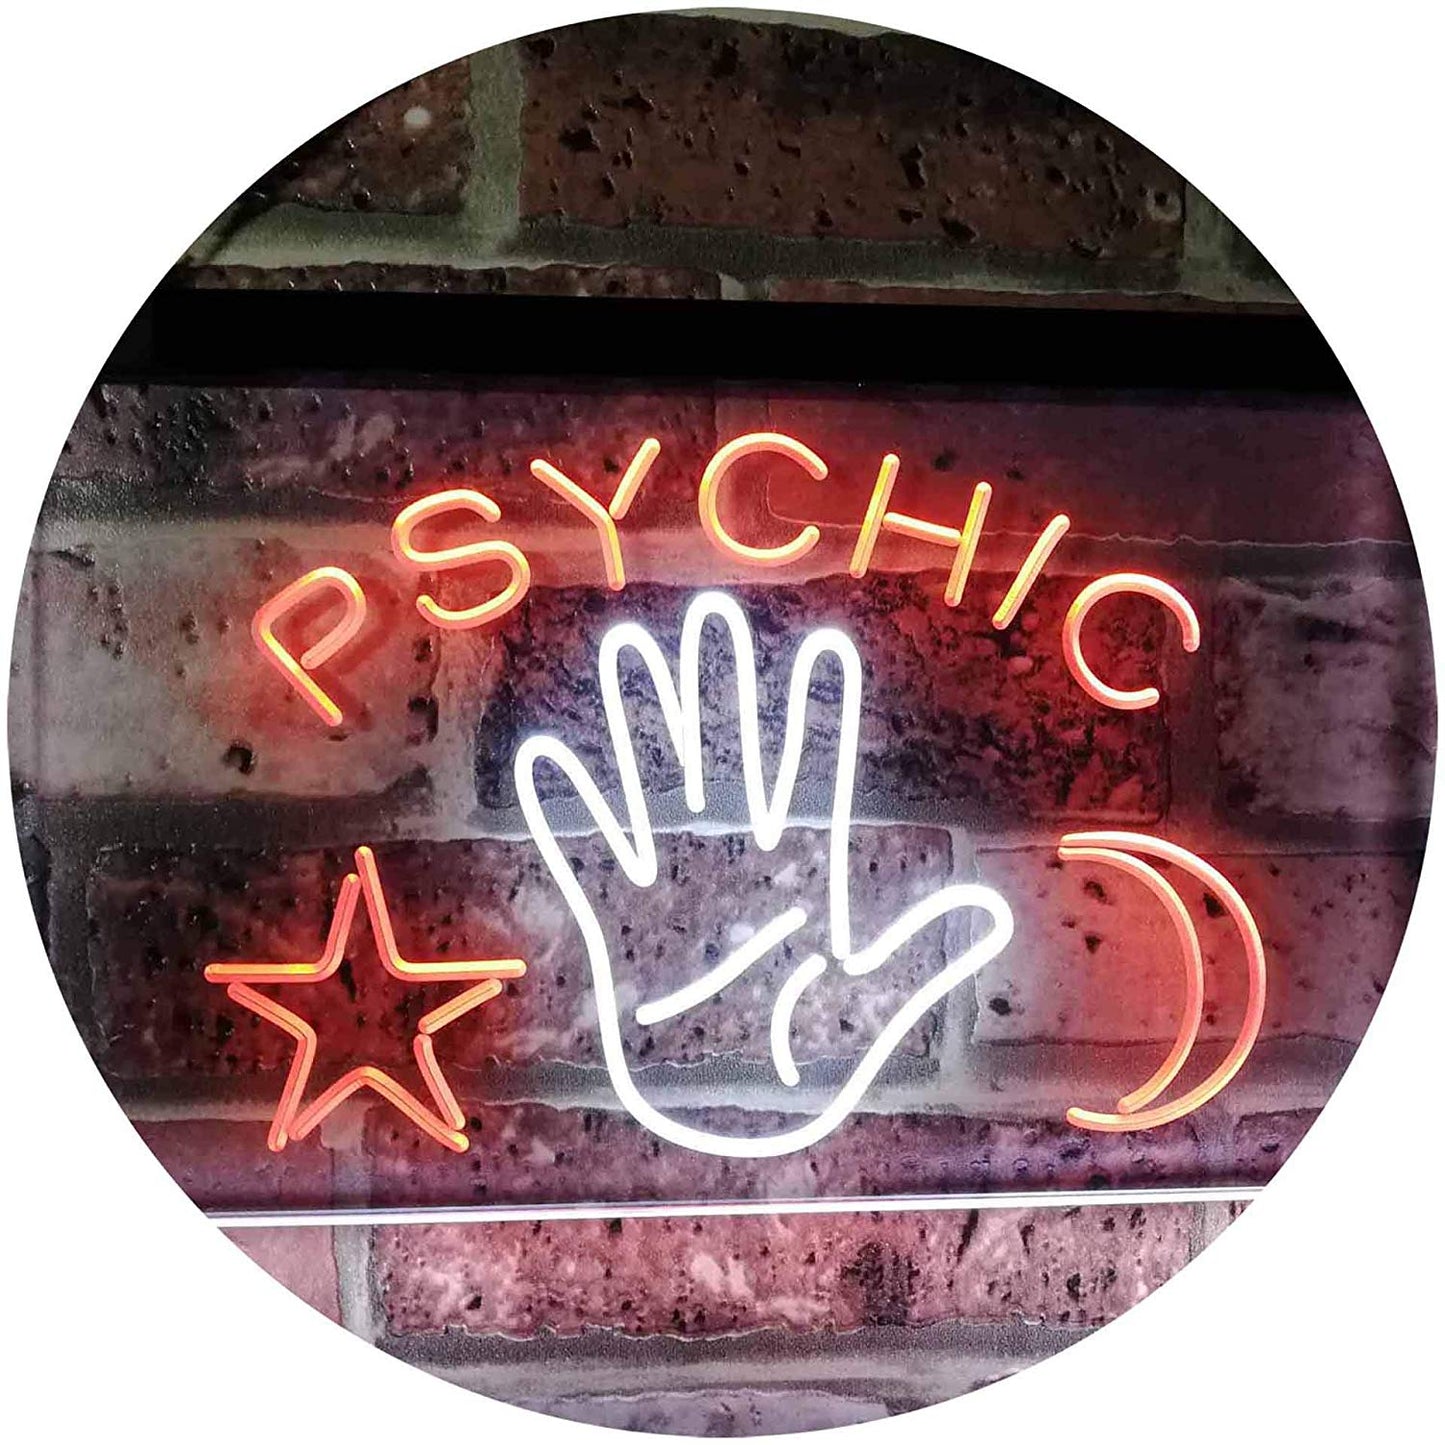 Psychic LED Neon Light Sign - Way Up Gifts